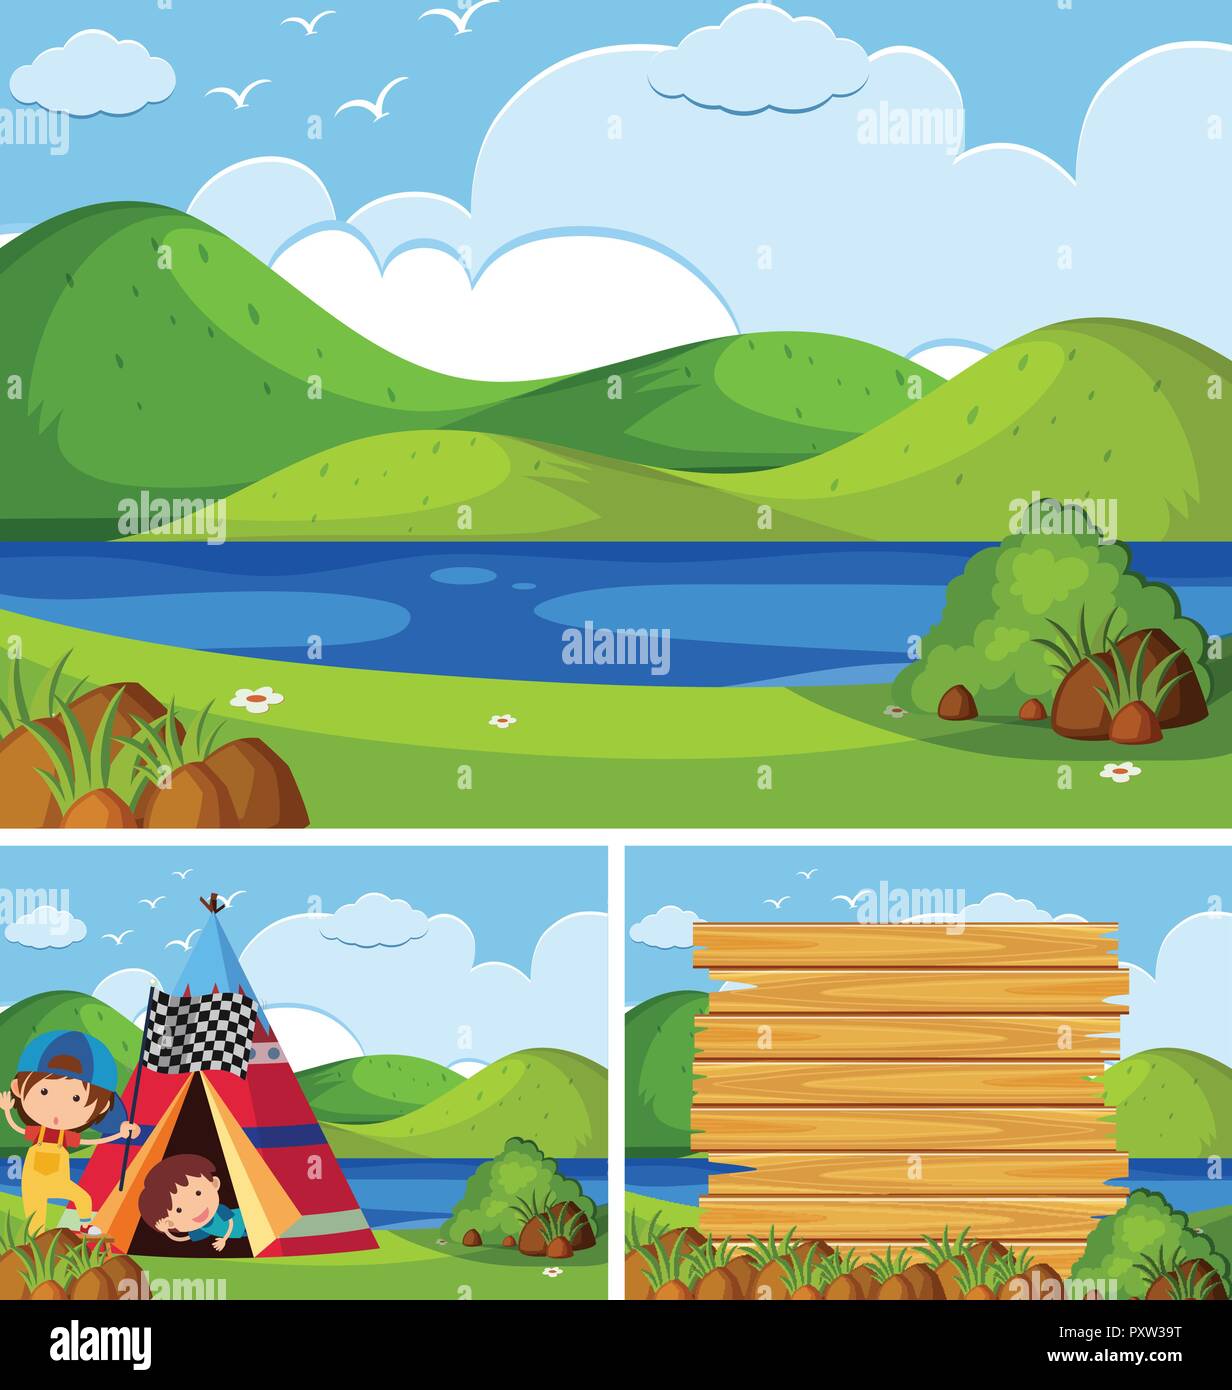 Three nature scenes with kids camping illustration Stock Vector